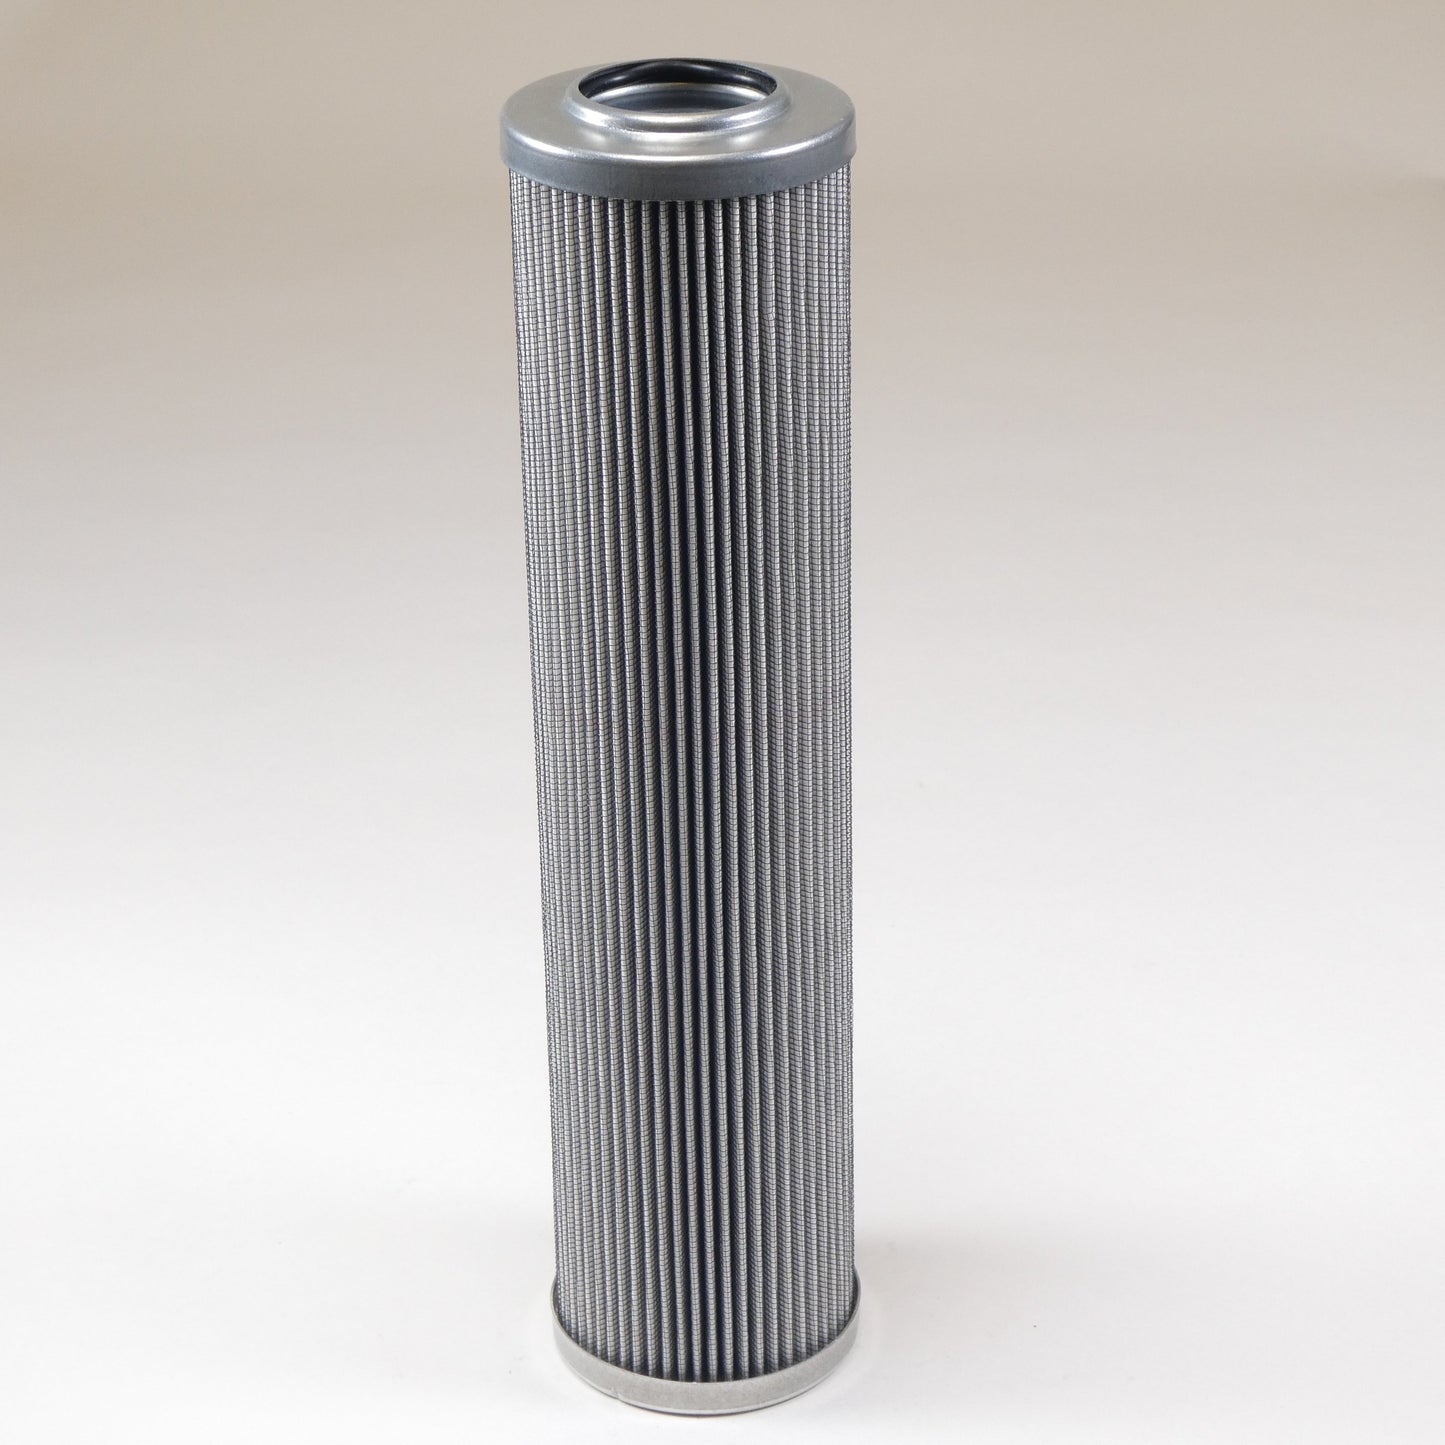 Hydrafil Replacement Filter Element for Hilco 3830-16-004-C